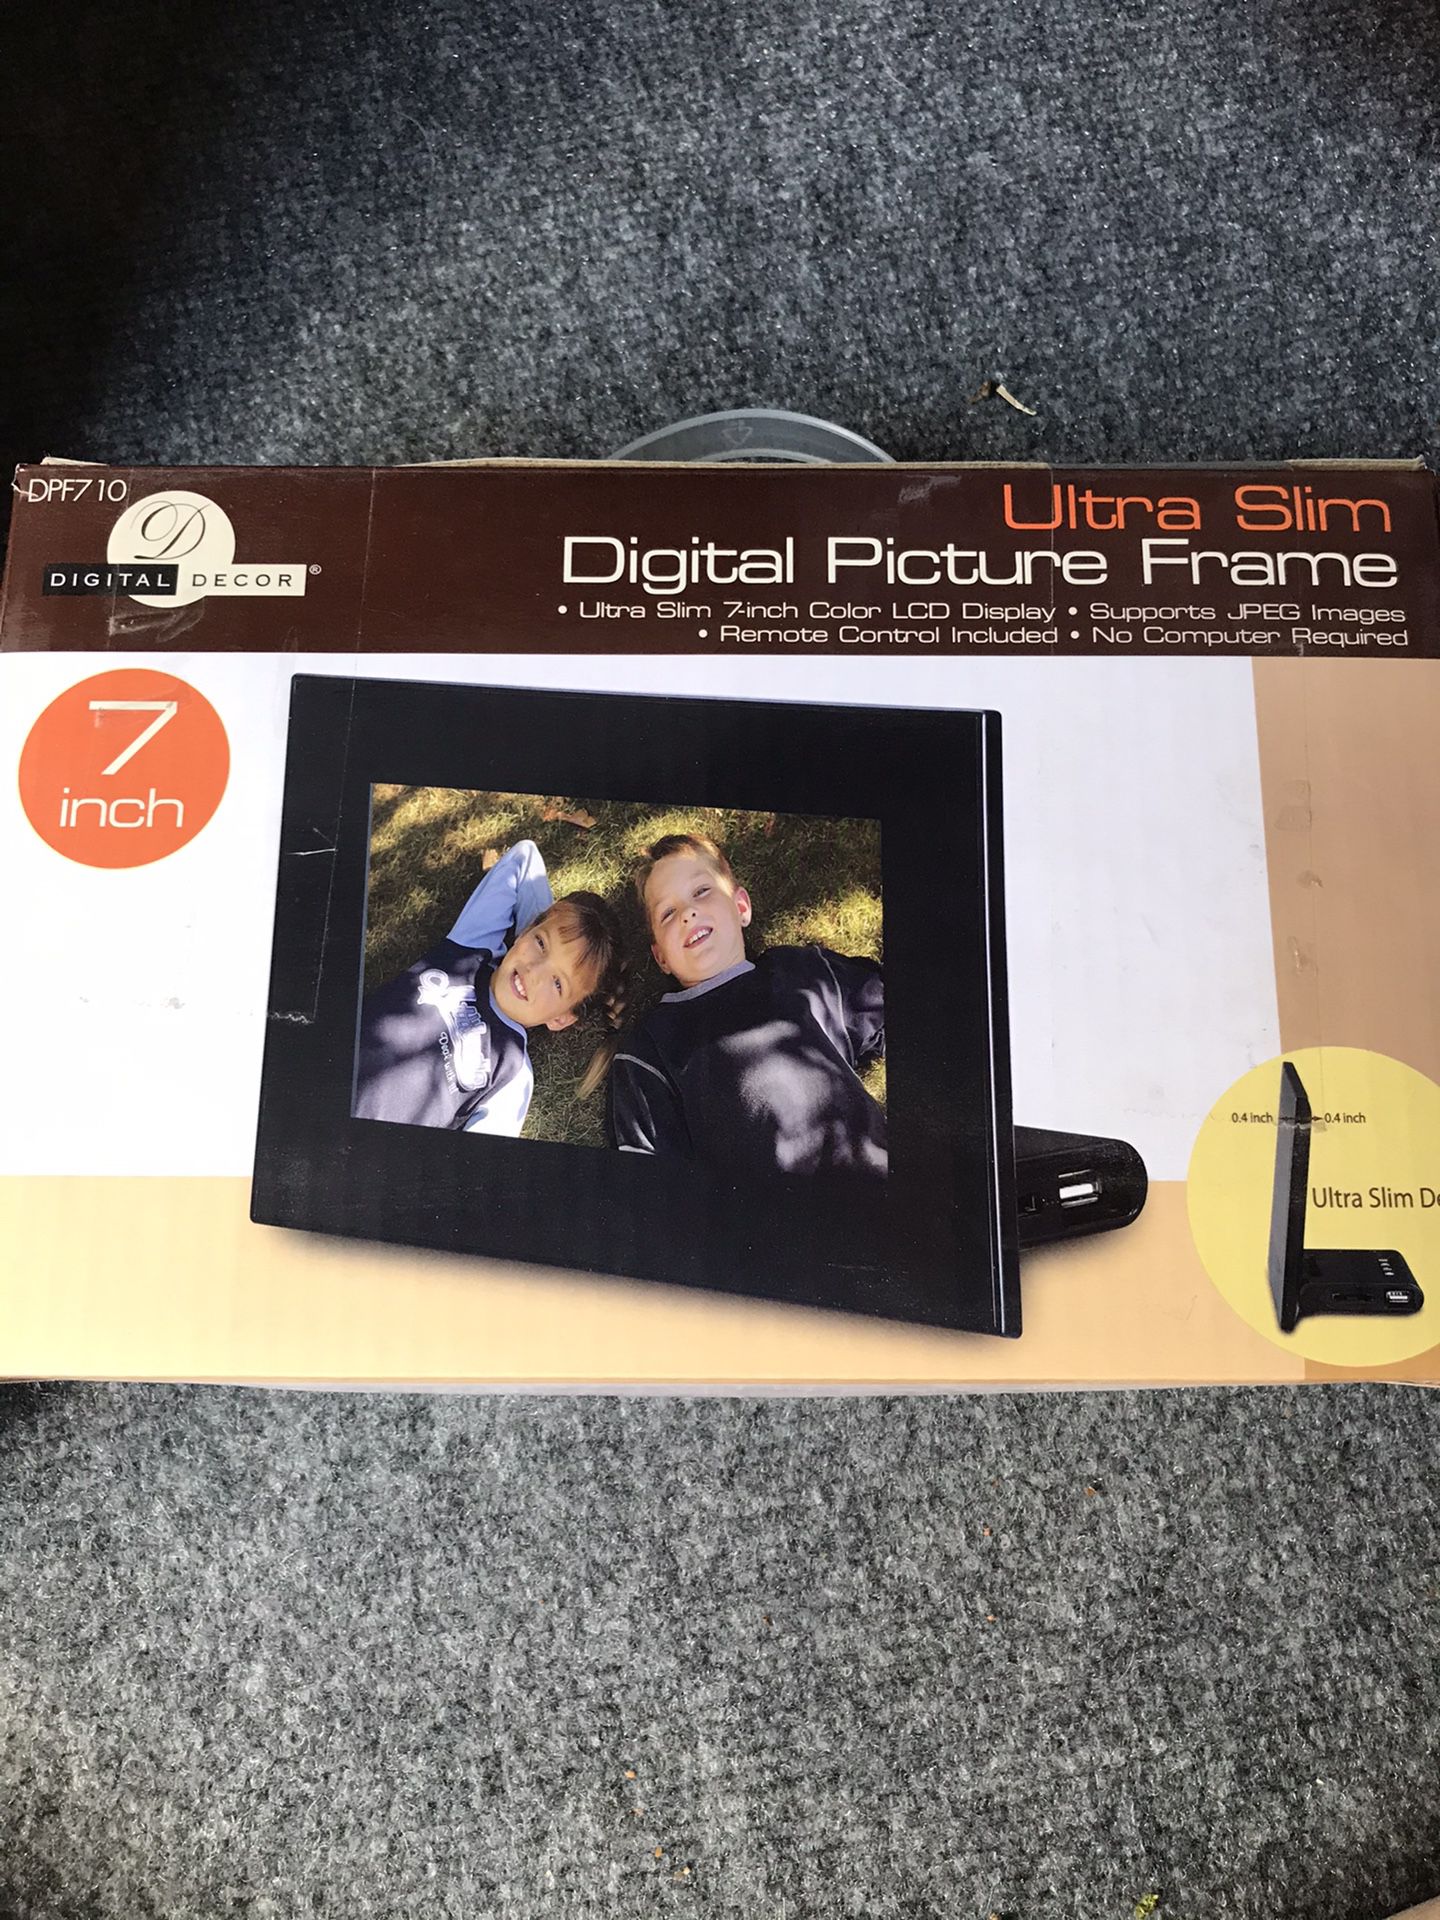 Digital picture frame-new in box